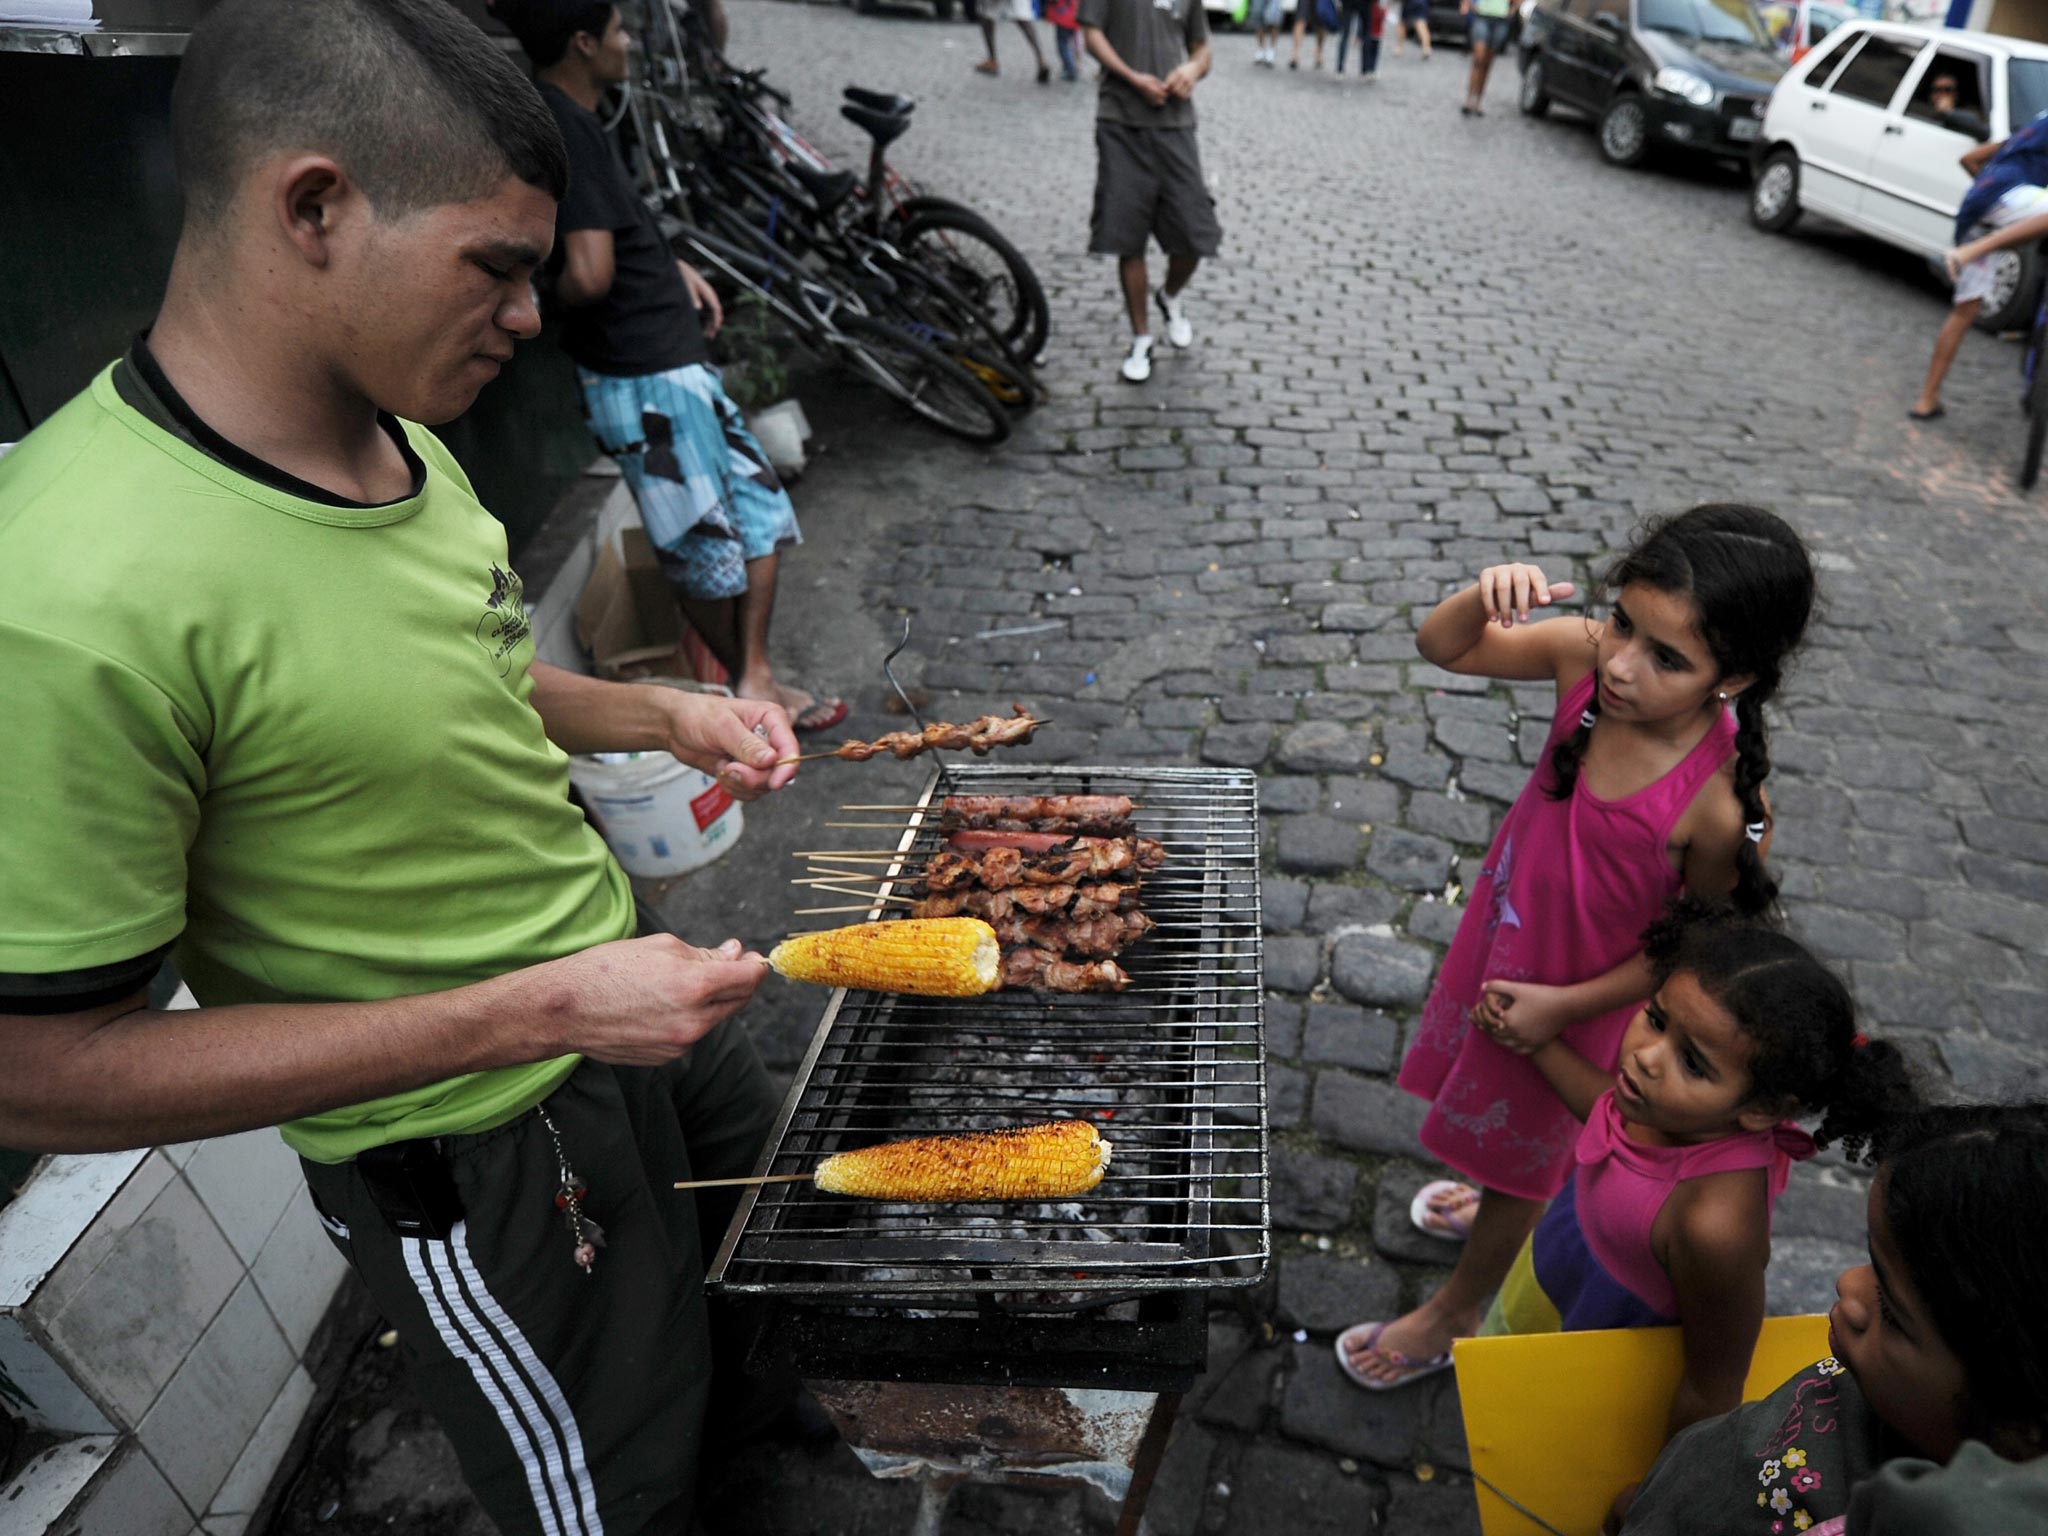 A bite of the action: A peddler sells snacks at one of the entrances to the Santa Marta ‘favela’ (shantytown) in Rio de Janeiro, Brazil